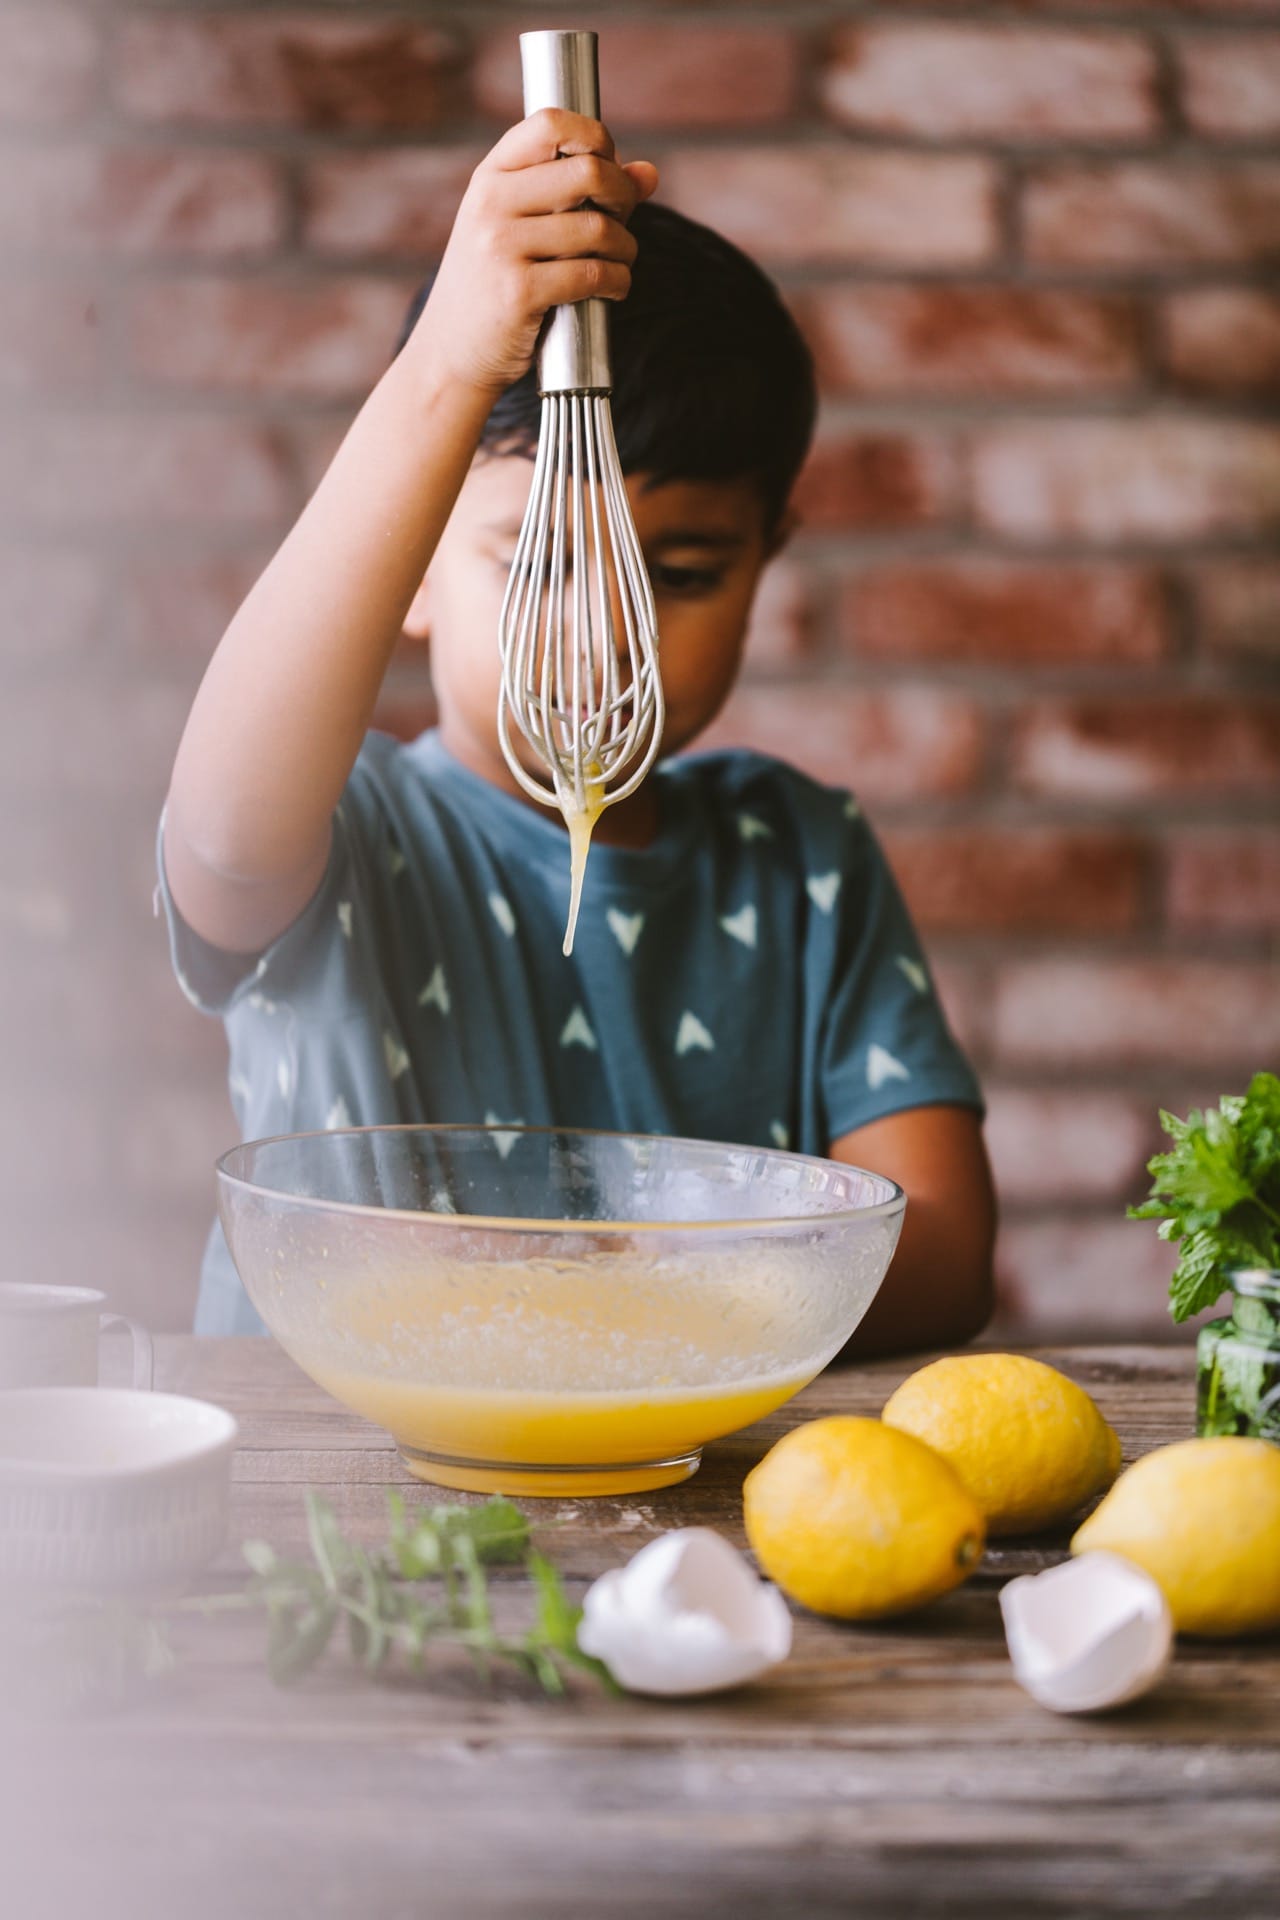 Little boy whisking egg in a mixing bowl